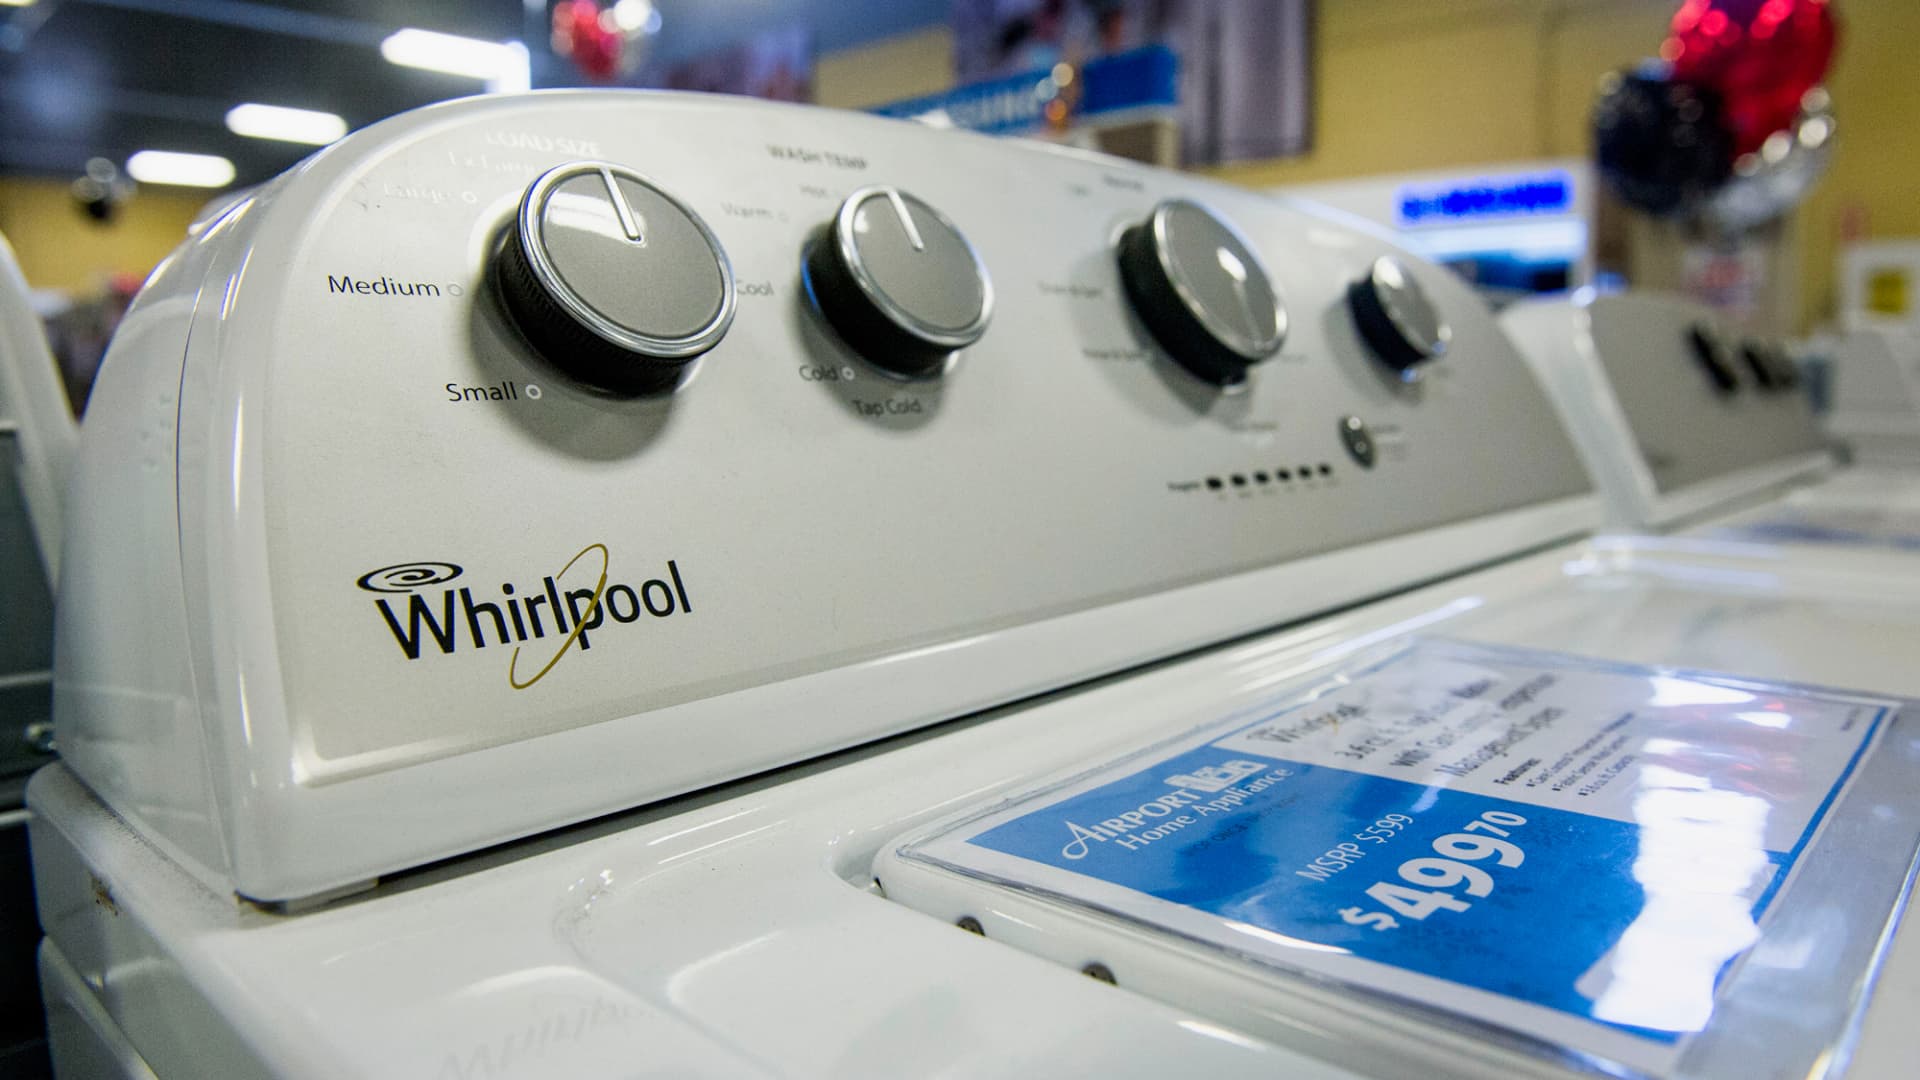 Whirlpool washing machines for sale at the Airport Home Appliance store in Concord, California.